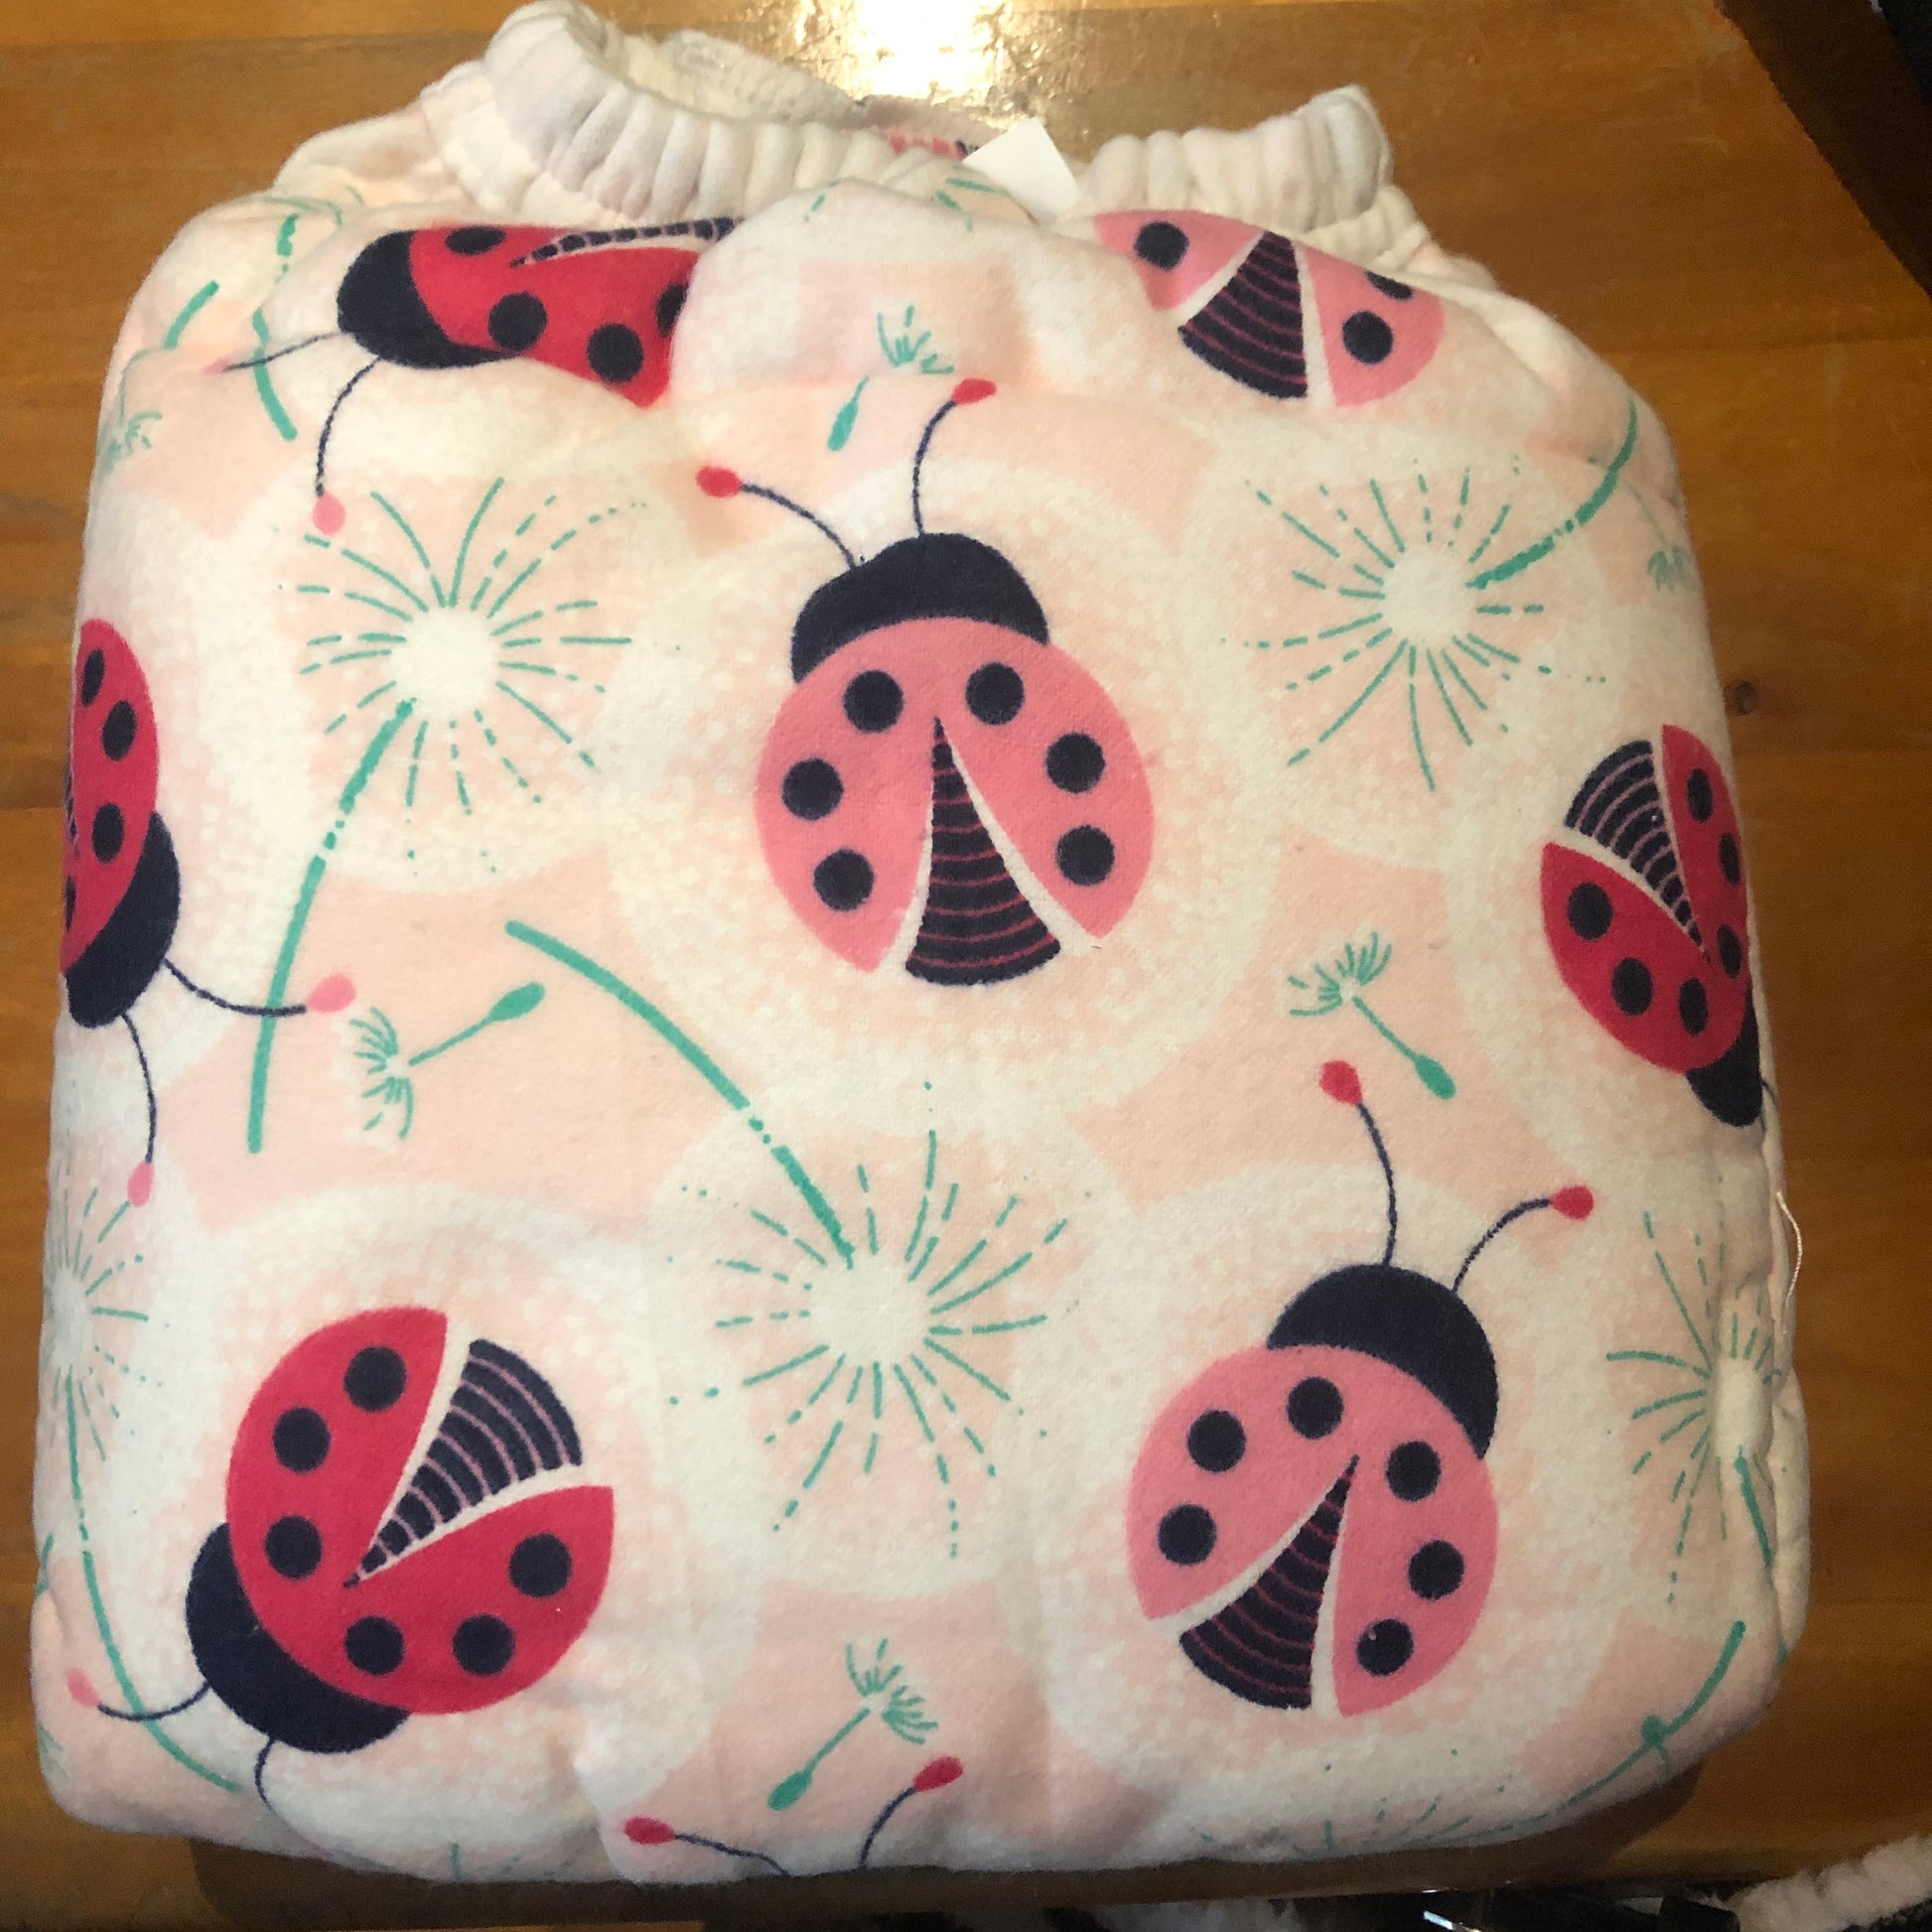 The Pink Bugs Cloth Diaper with Velcro Closure.